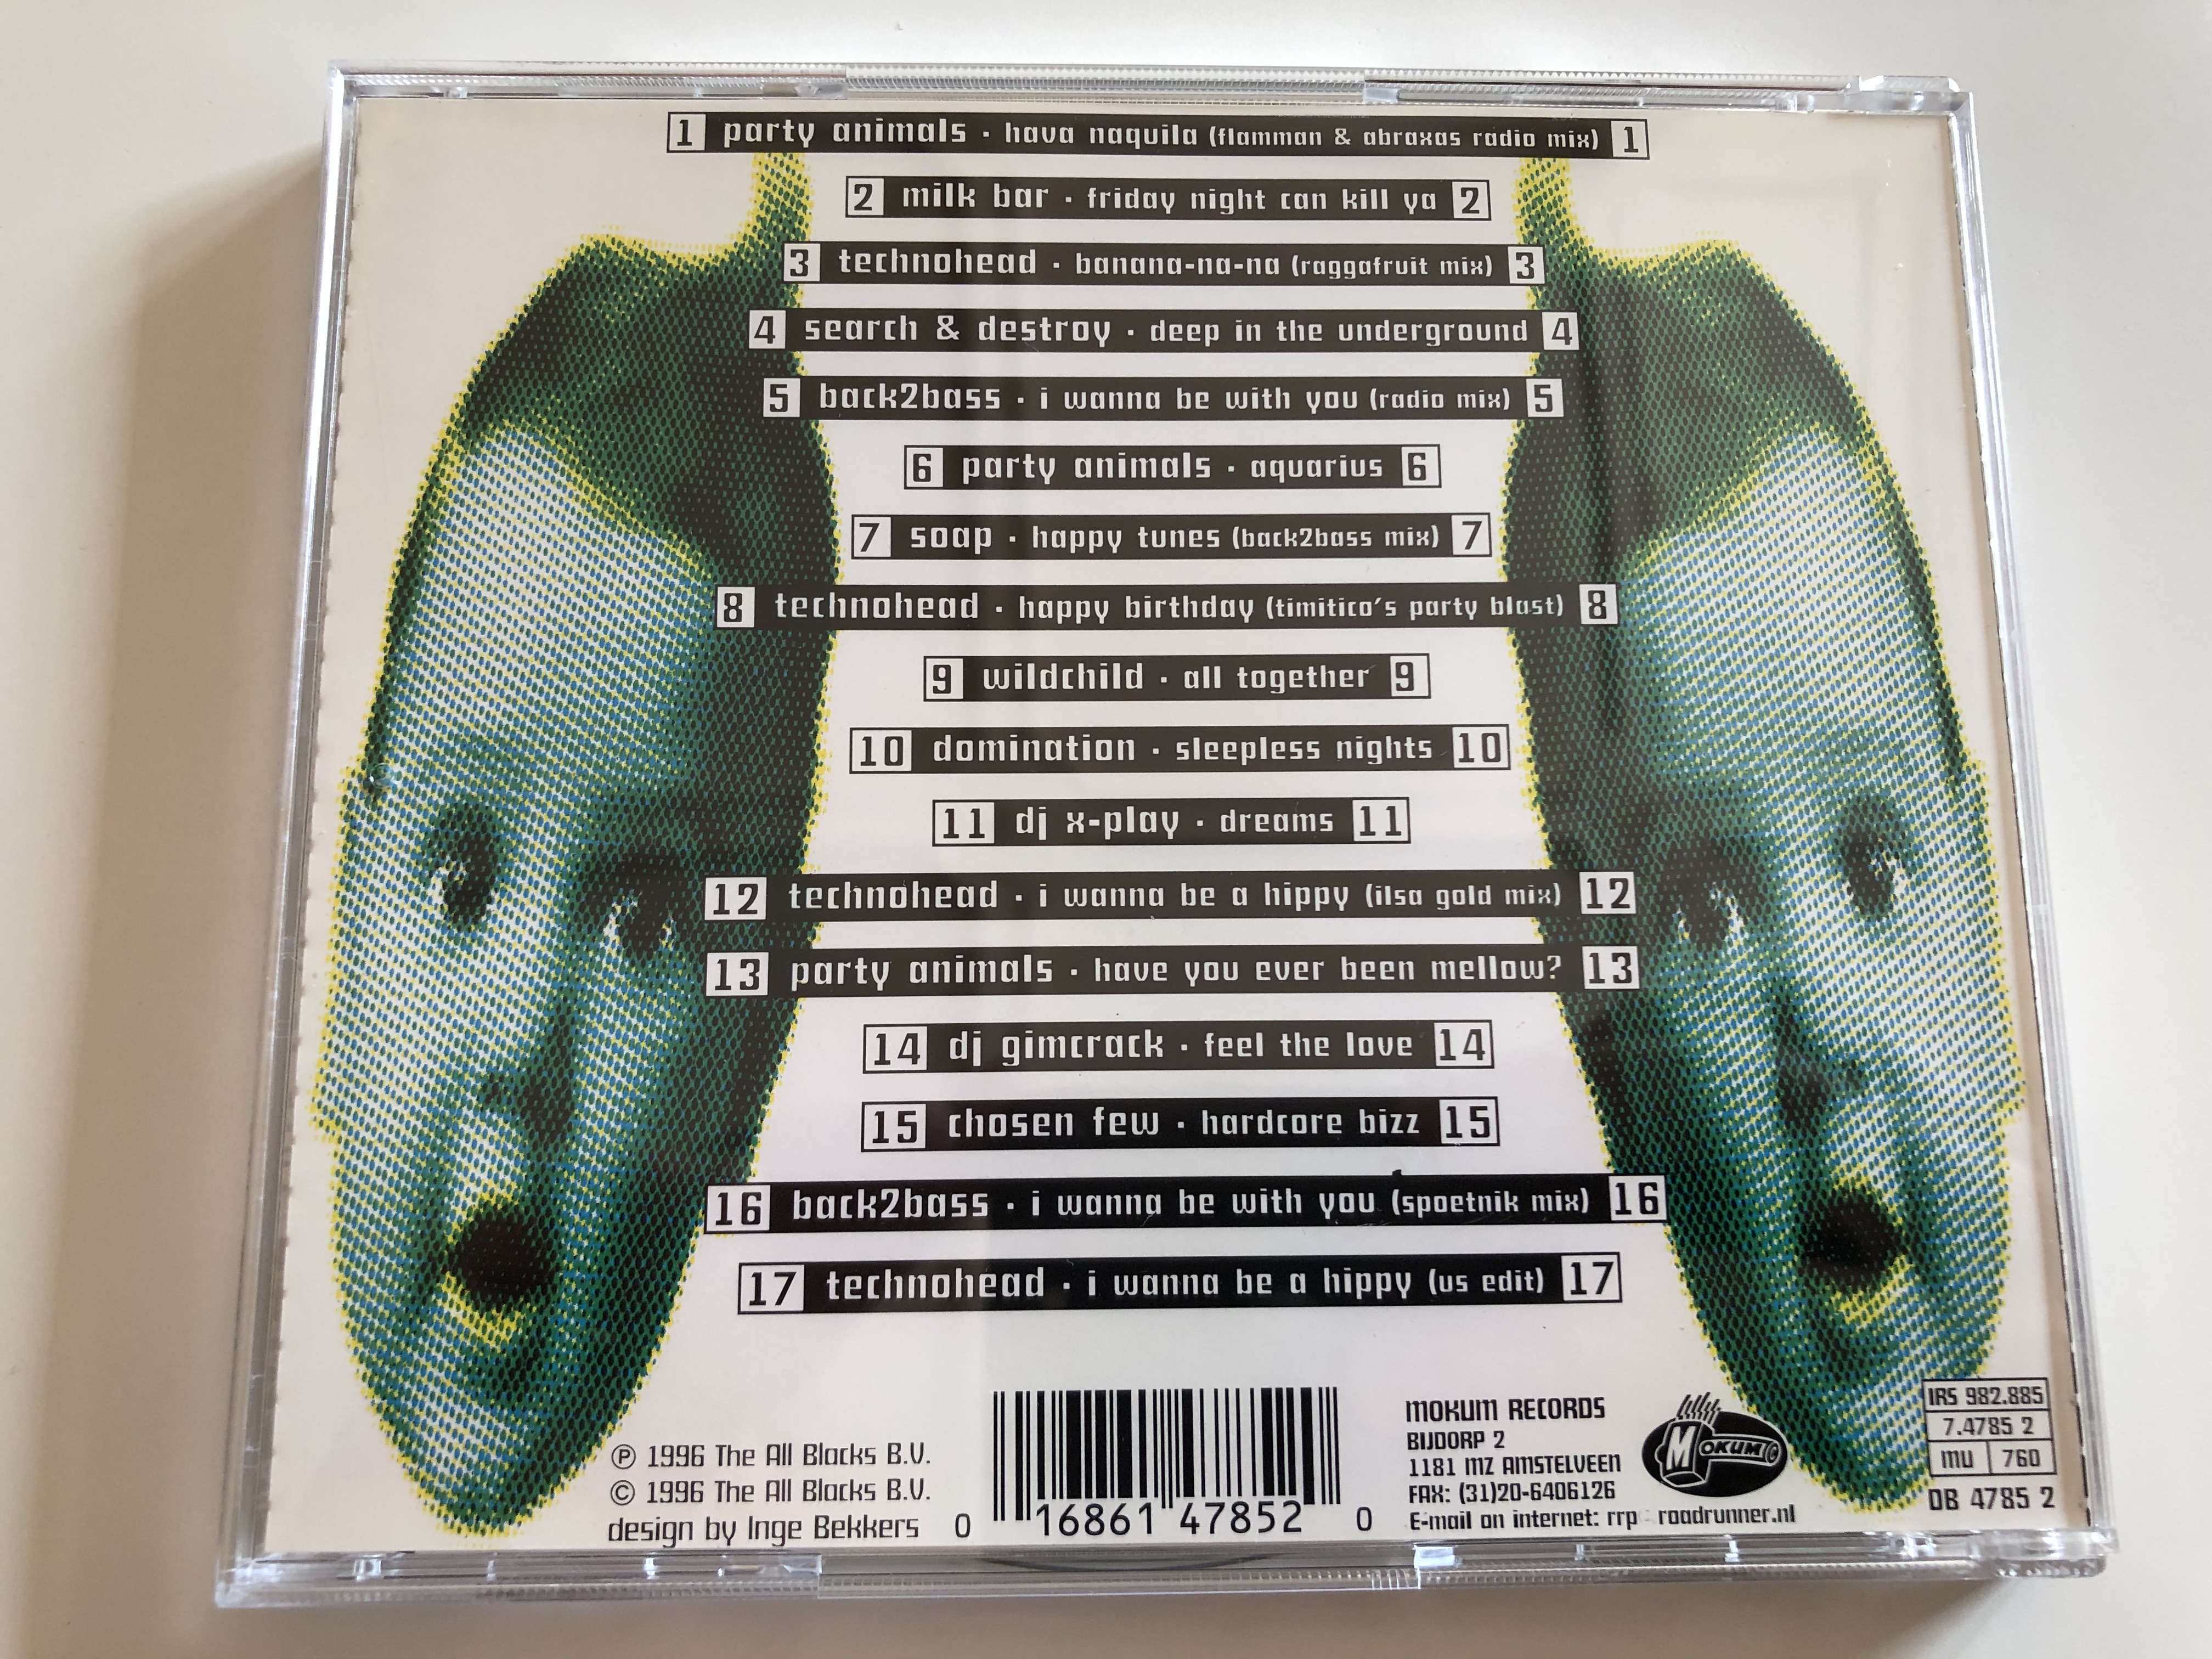 this-is-the-new-sound-of-popcore-incl-technohead-back2bass-party-animals-search-destroy-audio-cd-1996-mokum-records-db-4785-2-4-.jpg